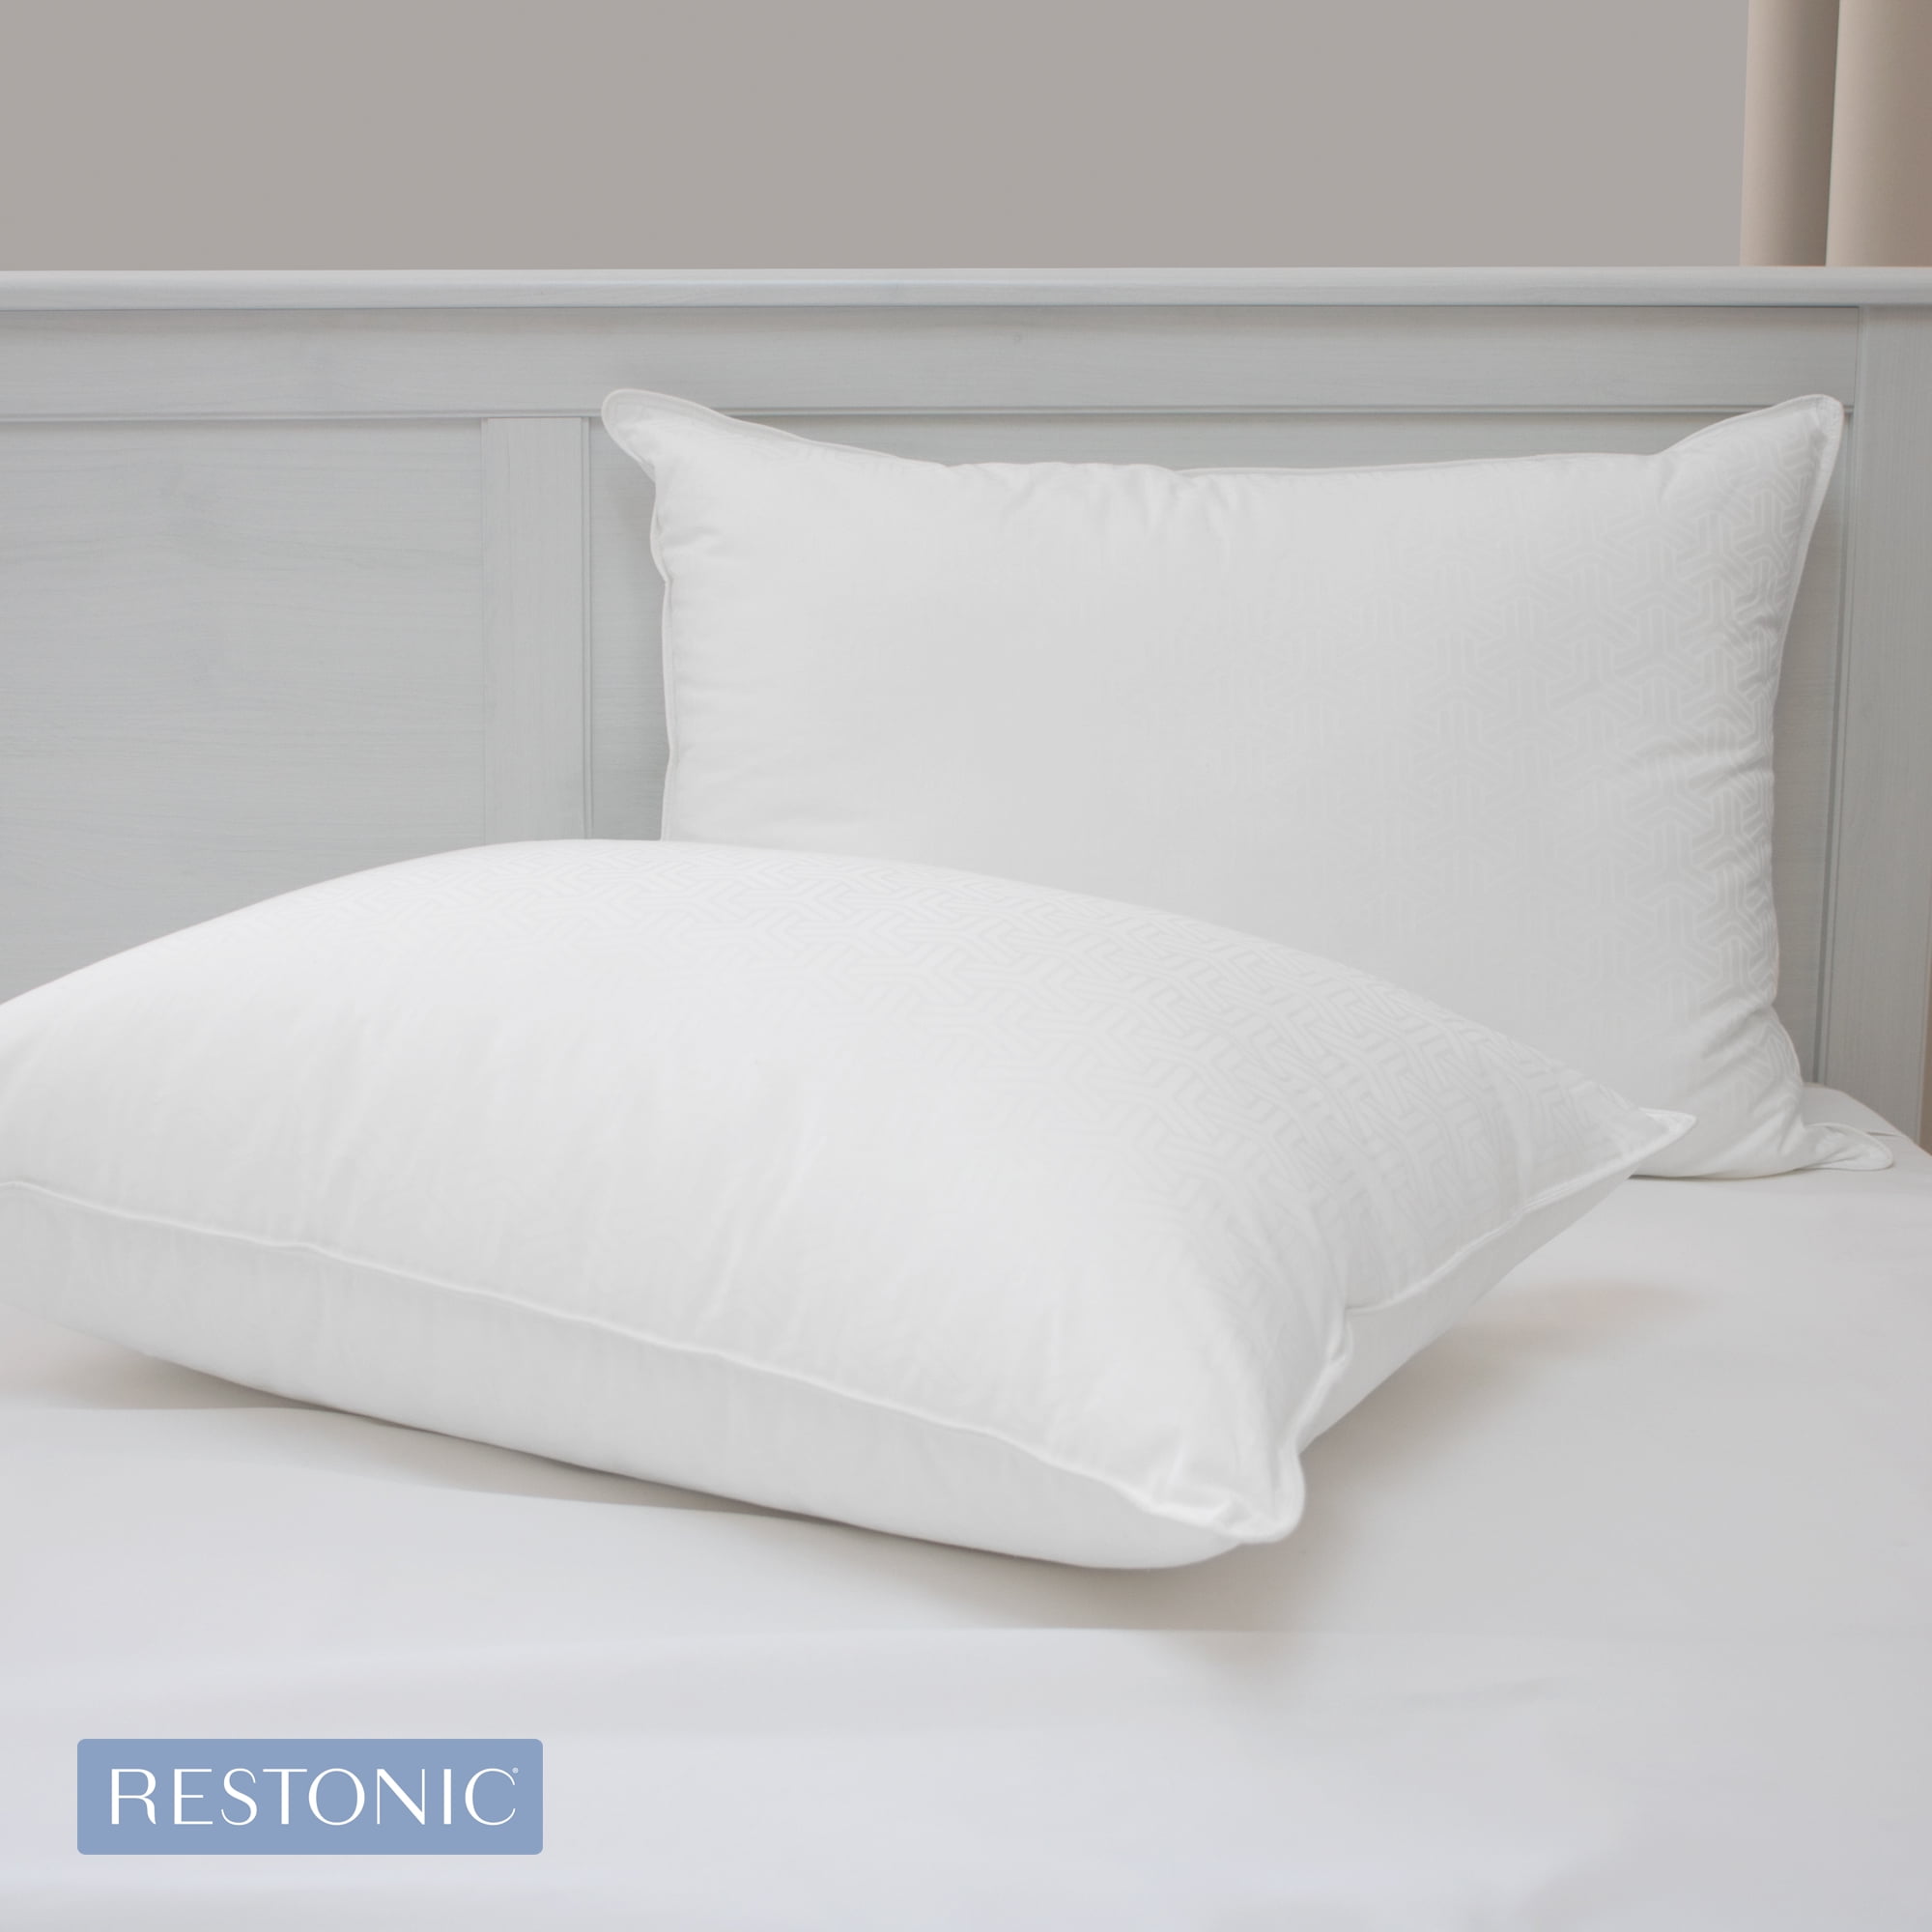 Details about   Extra Firm Pillows 200 TC Cotton Polyester Fiber Fill Bed Pillow Set of 2 White 